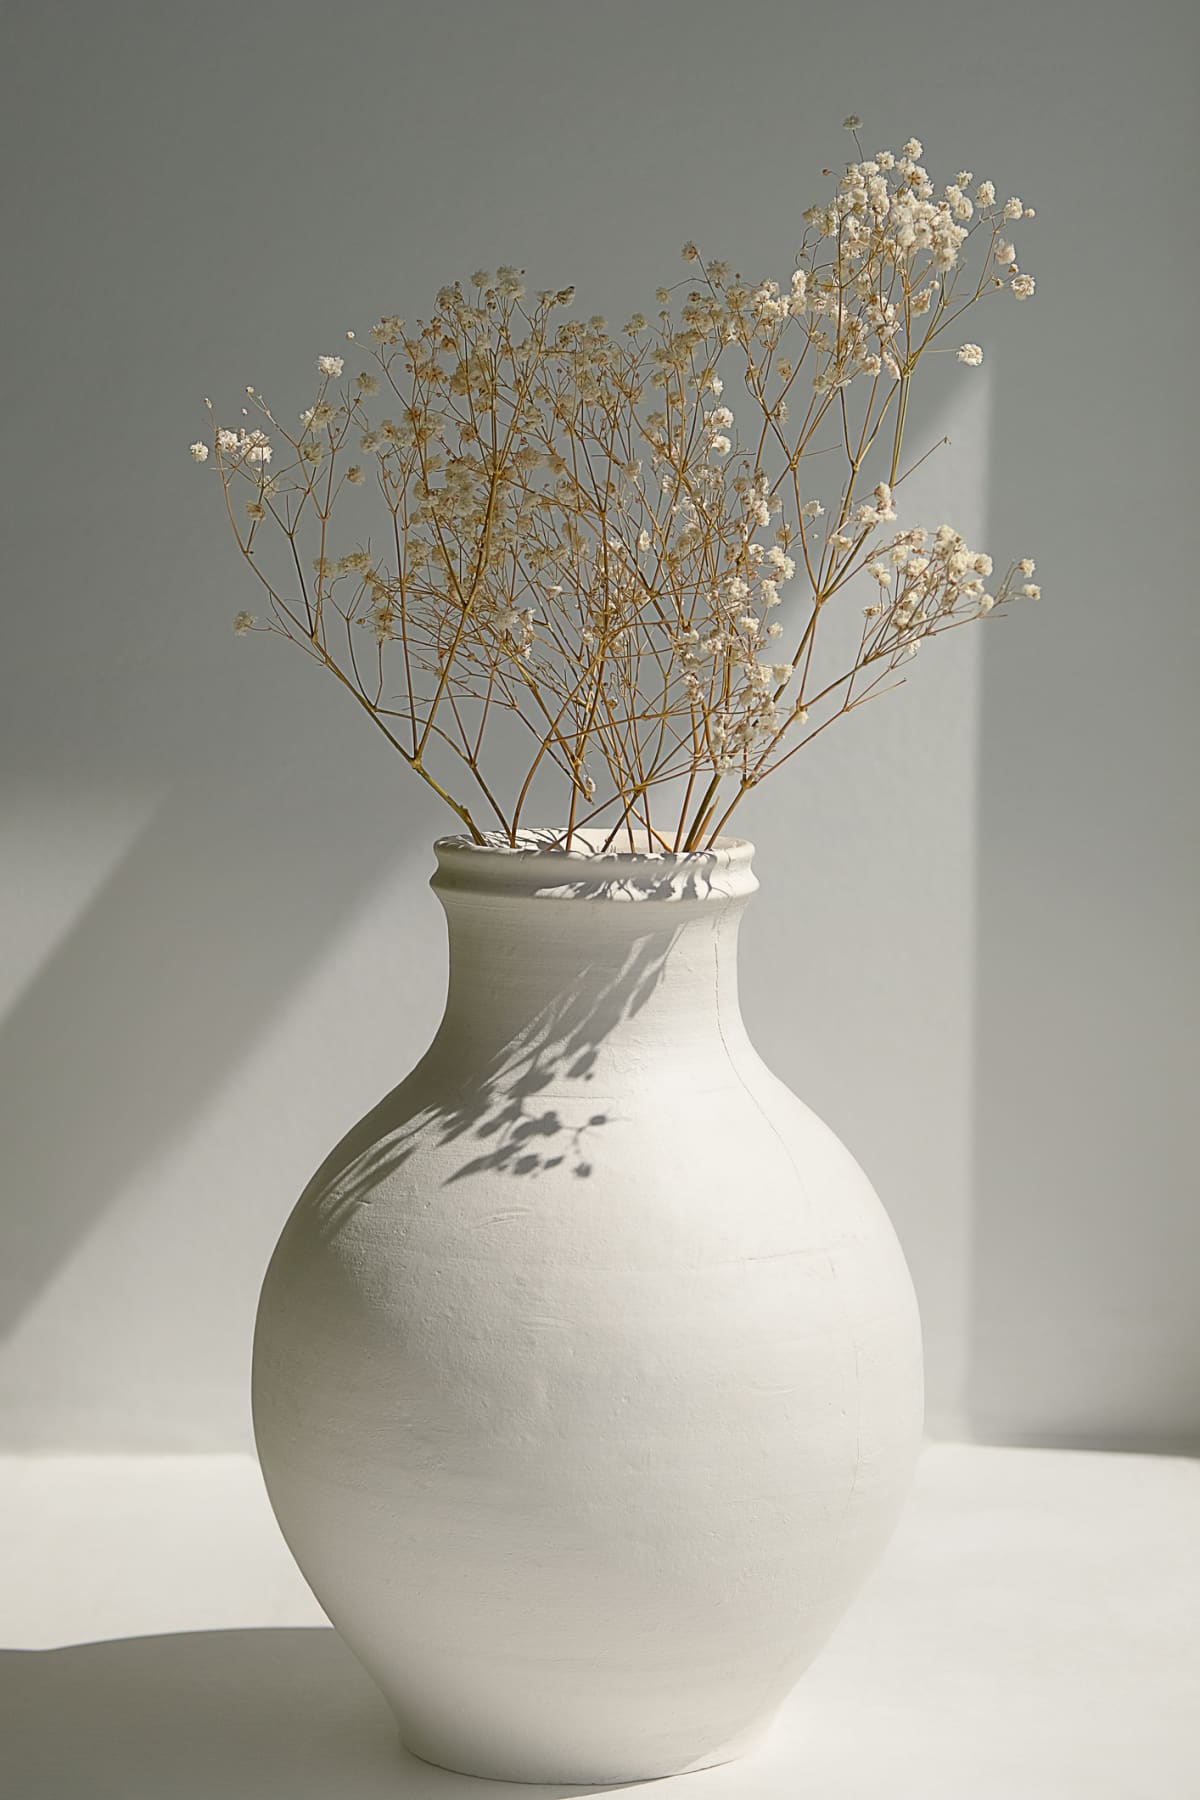 Dried flowers in a white antique vase on the window.